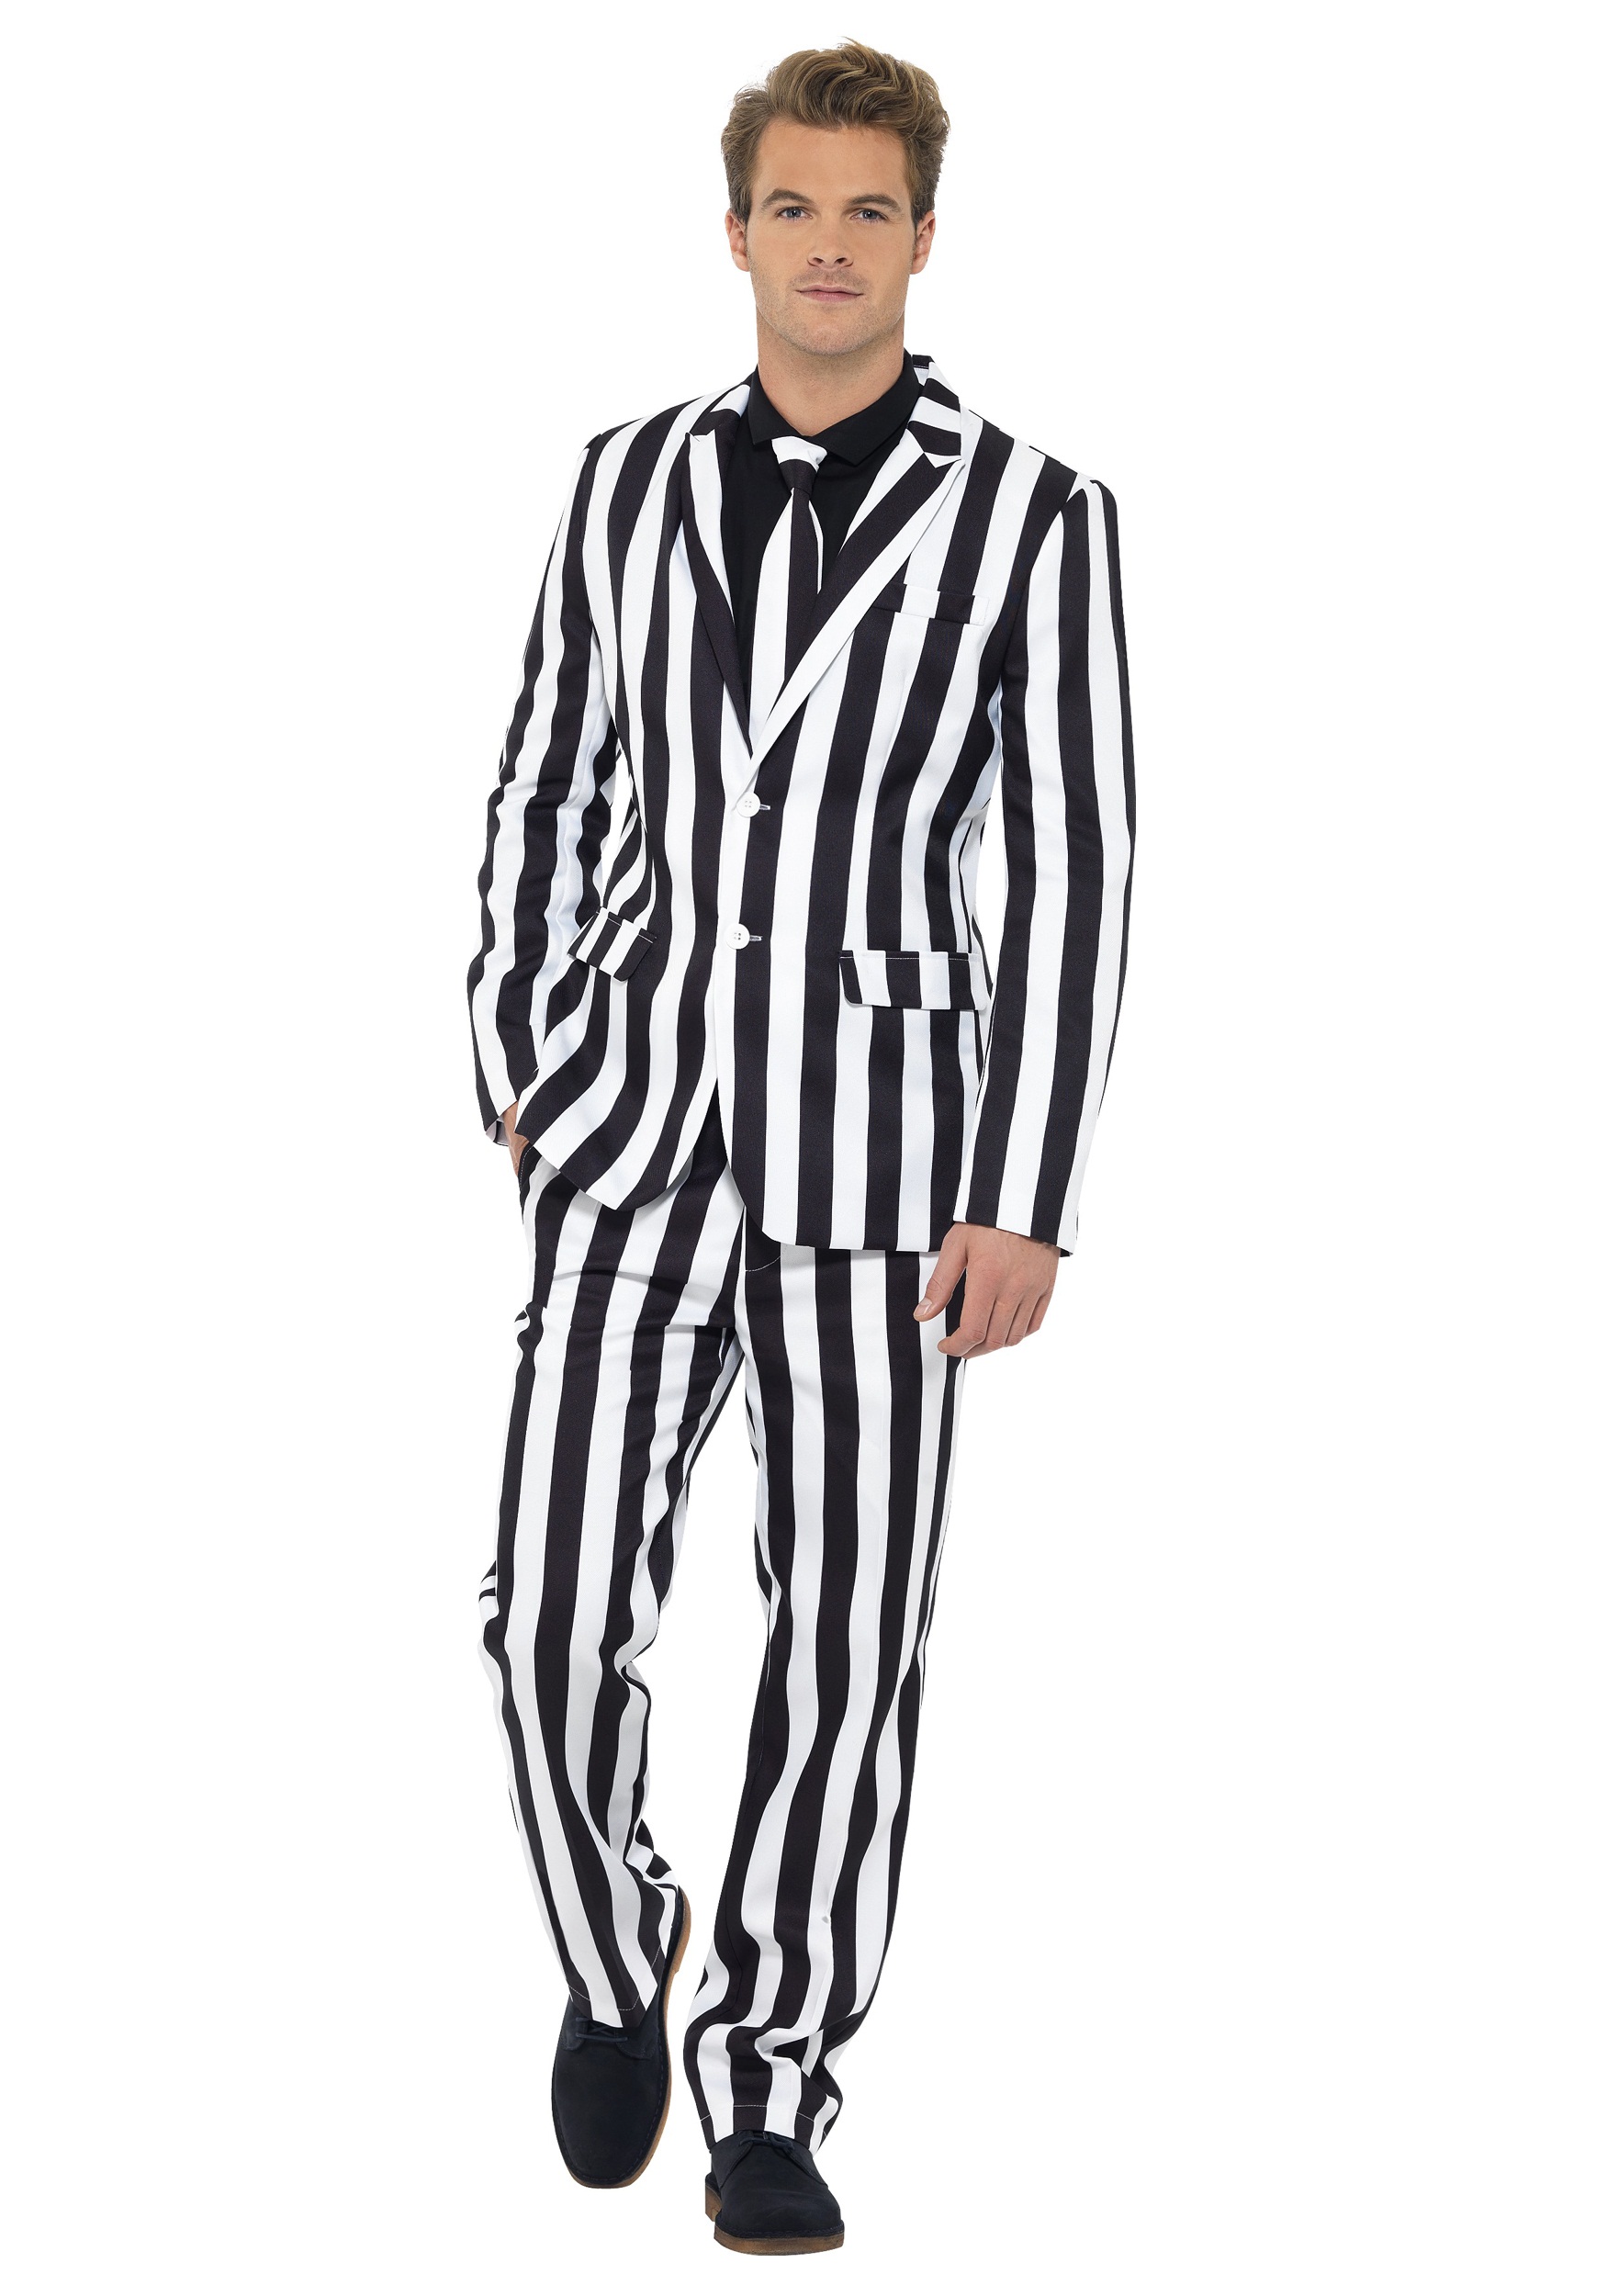 Stag Do Suits Fancy Dress Costume Stand out suits for men who like to